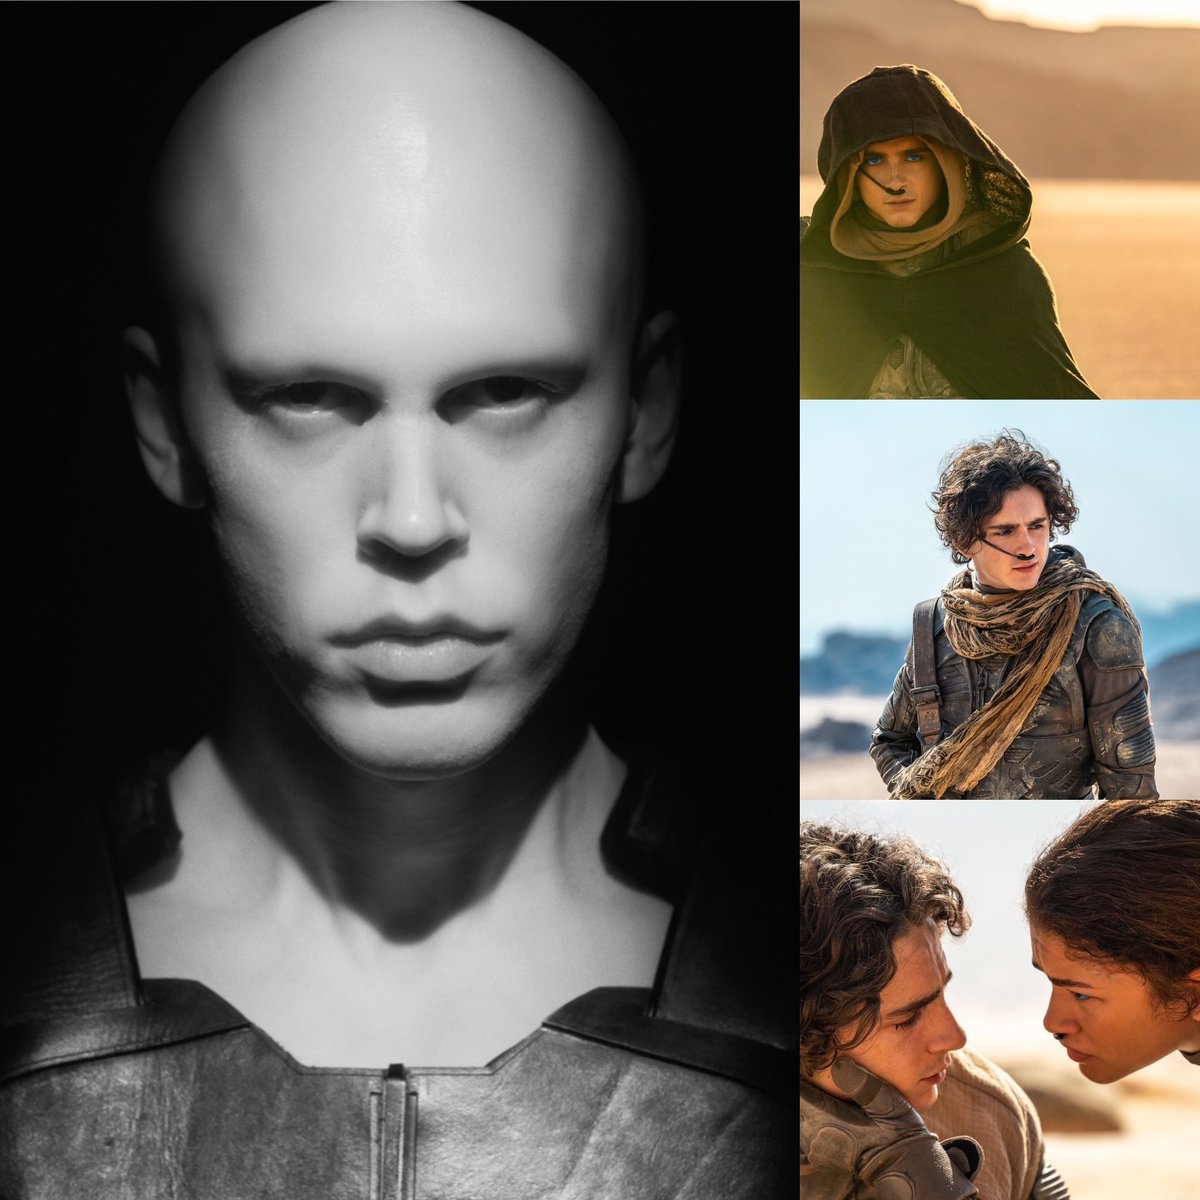 Moving over for a 2nd week to your #nonprofit #BijouByTheBay is the critically acclaimed #Dune2! Don’t miss this incredible movie! #elkrapids #PureMichigan #Kalkaska #Leland #NorthwesternMichiganCollege #traversecity